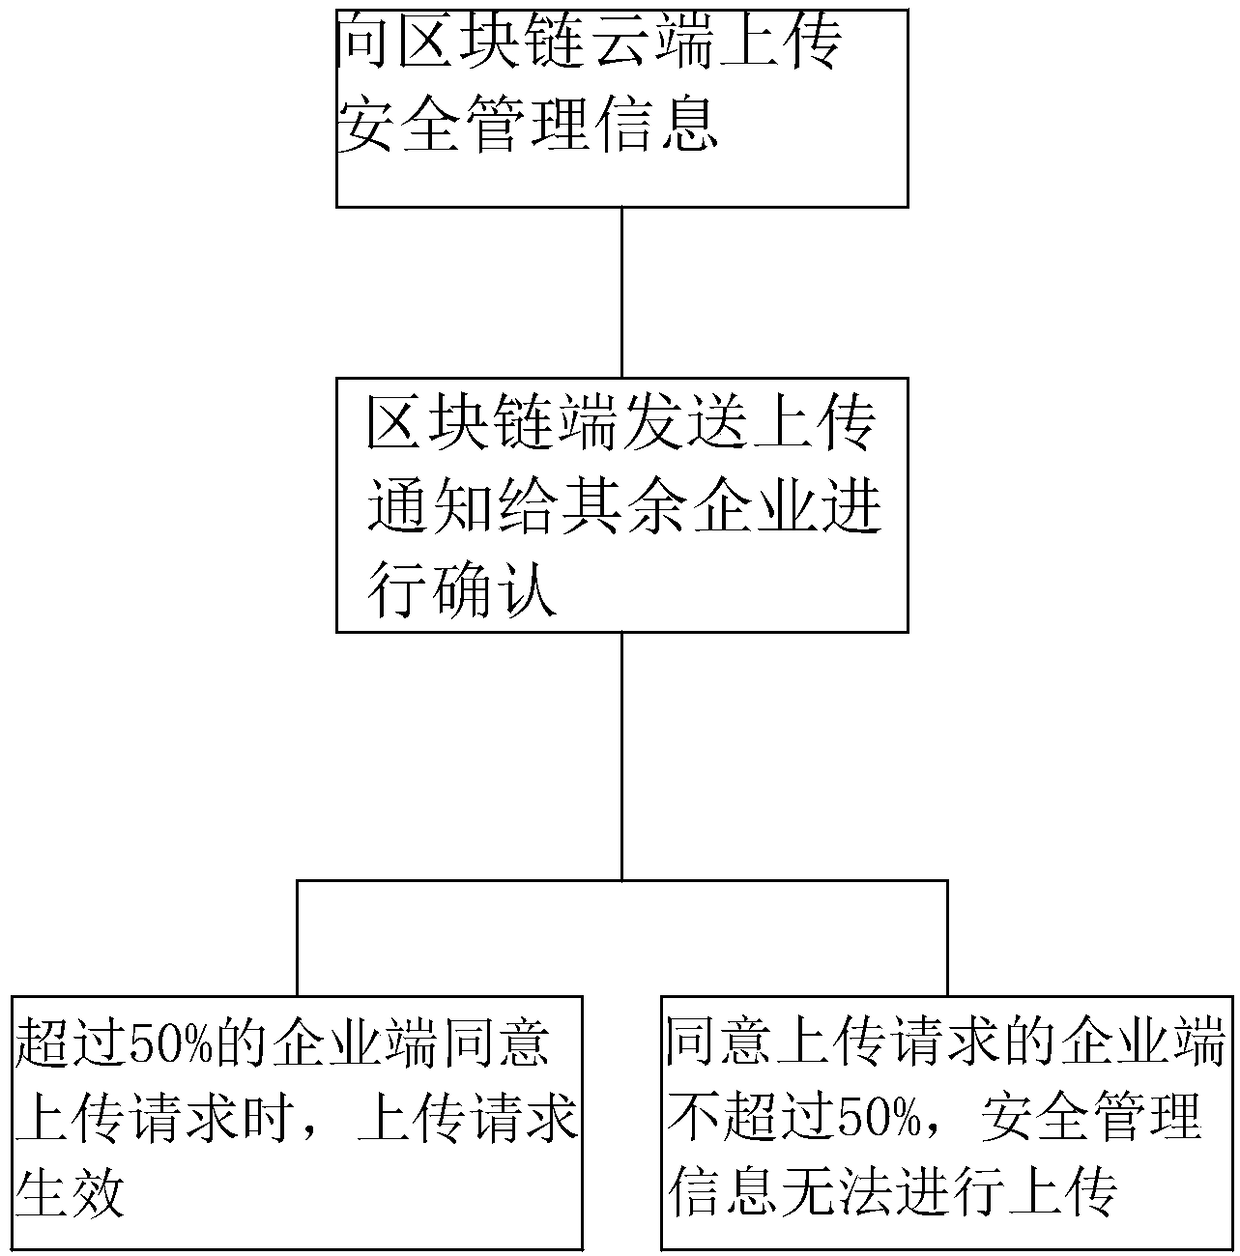 Safety production information sharing method based on block chain technology